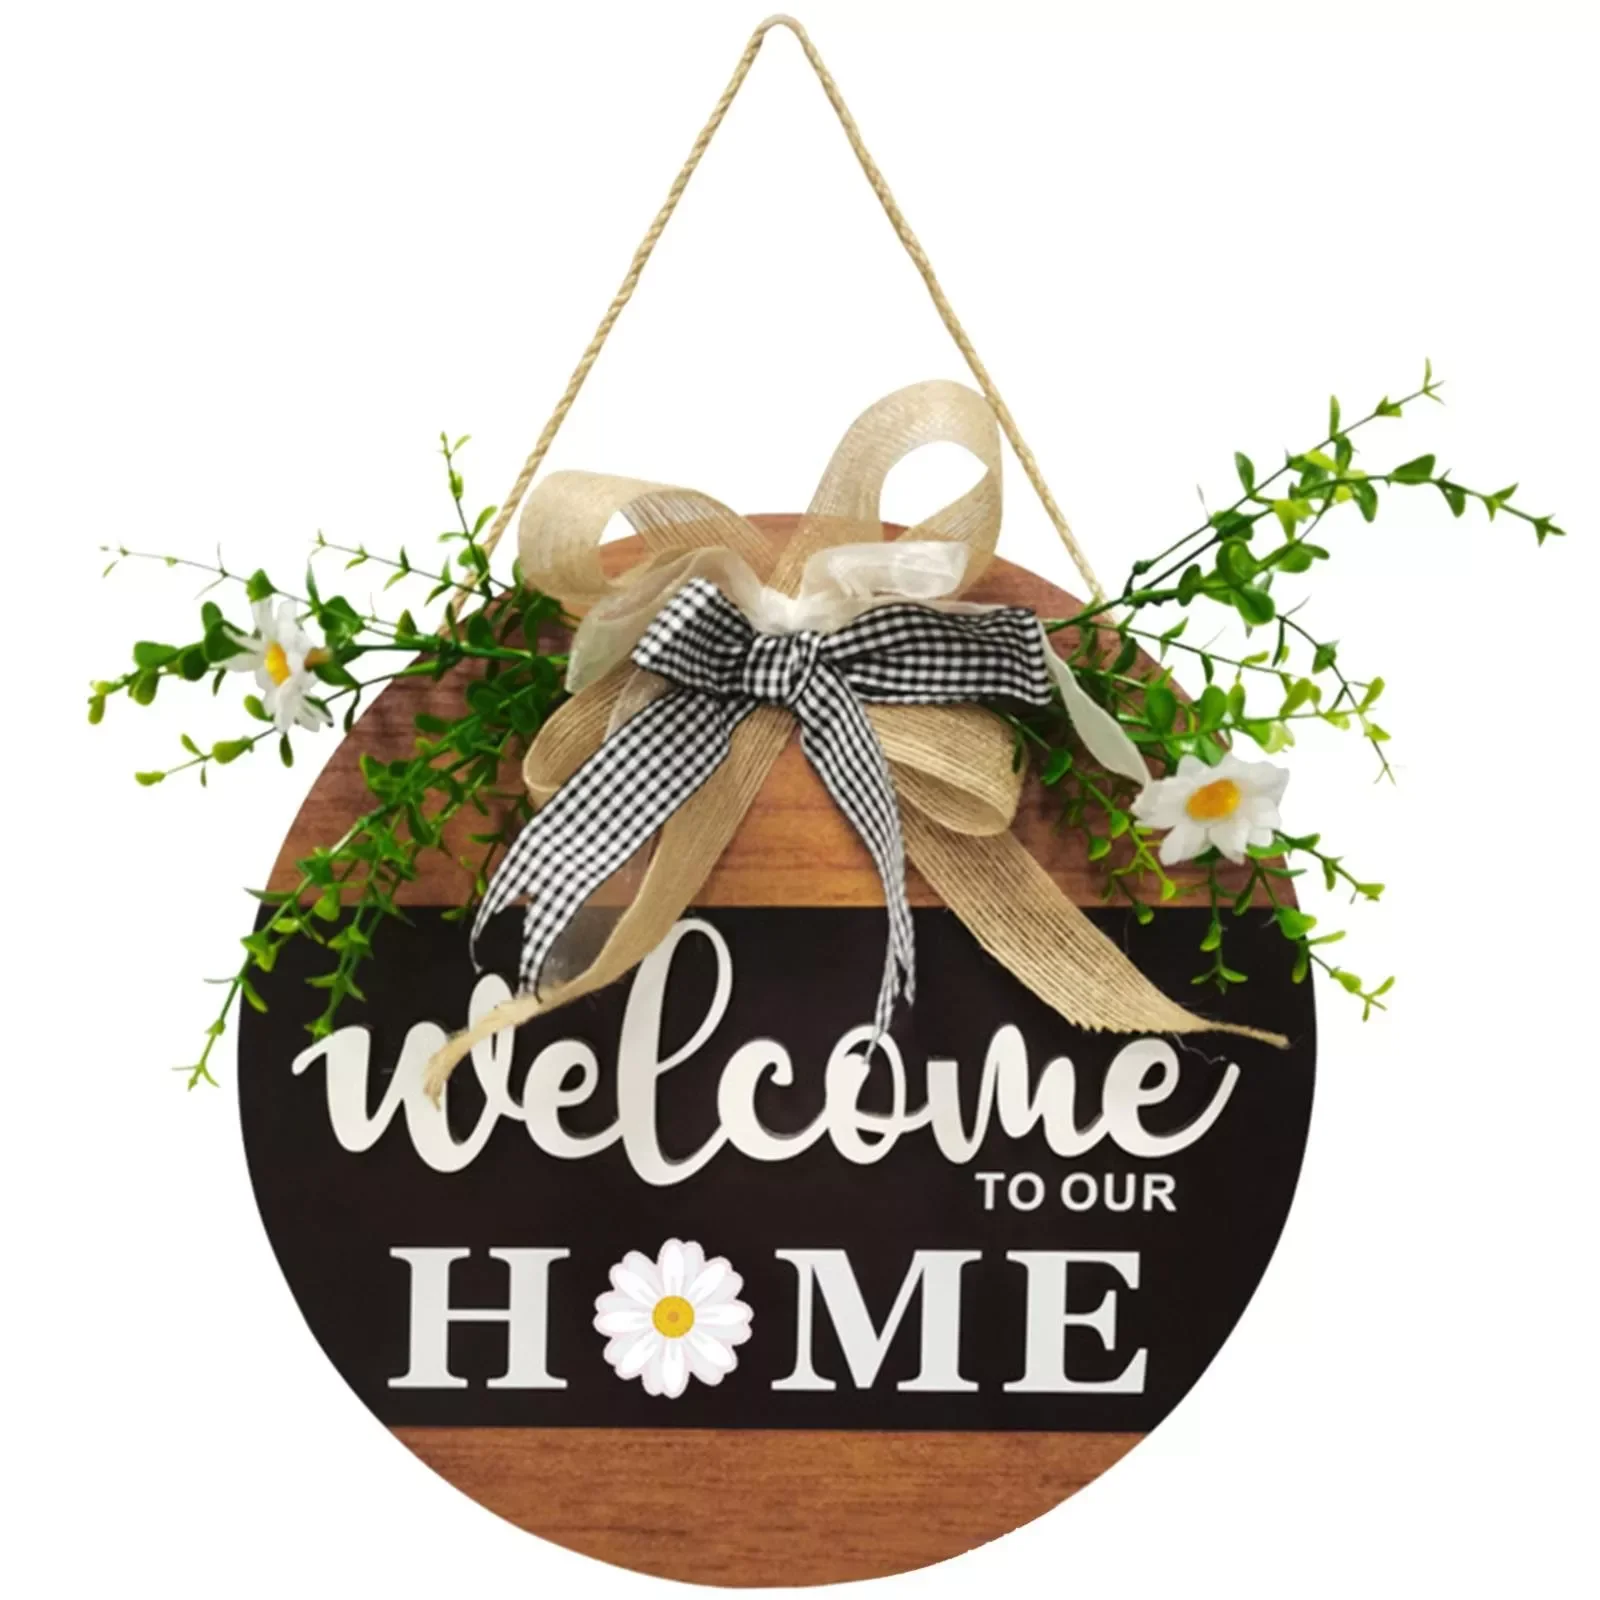 

Rustic Round Wood Porch Wreaths For Outdoor Farmhouse Hanging Sign Welcome Door Decorations Hanging Summer Light Mirror for Room